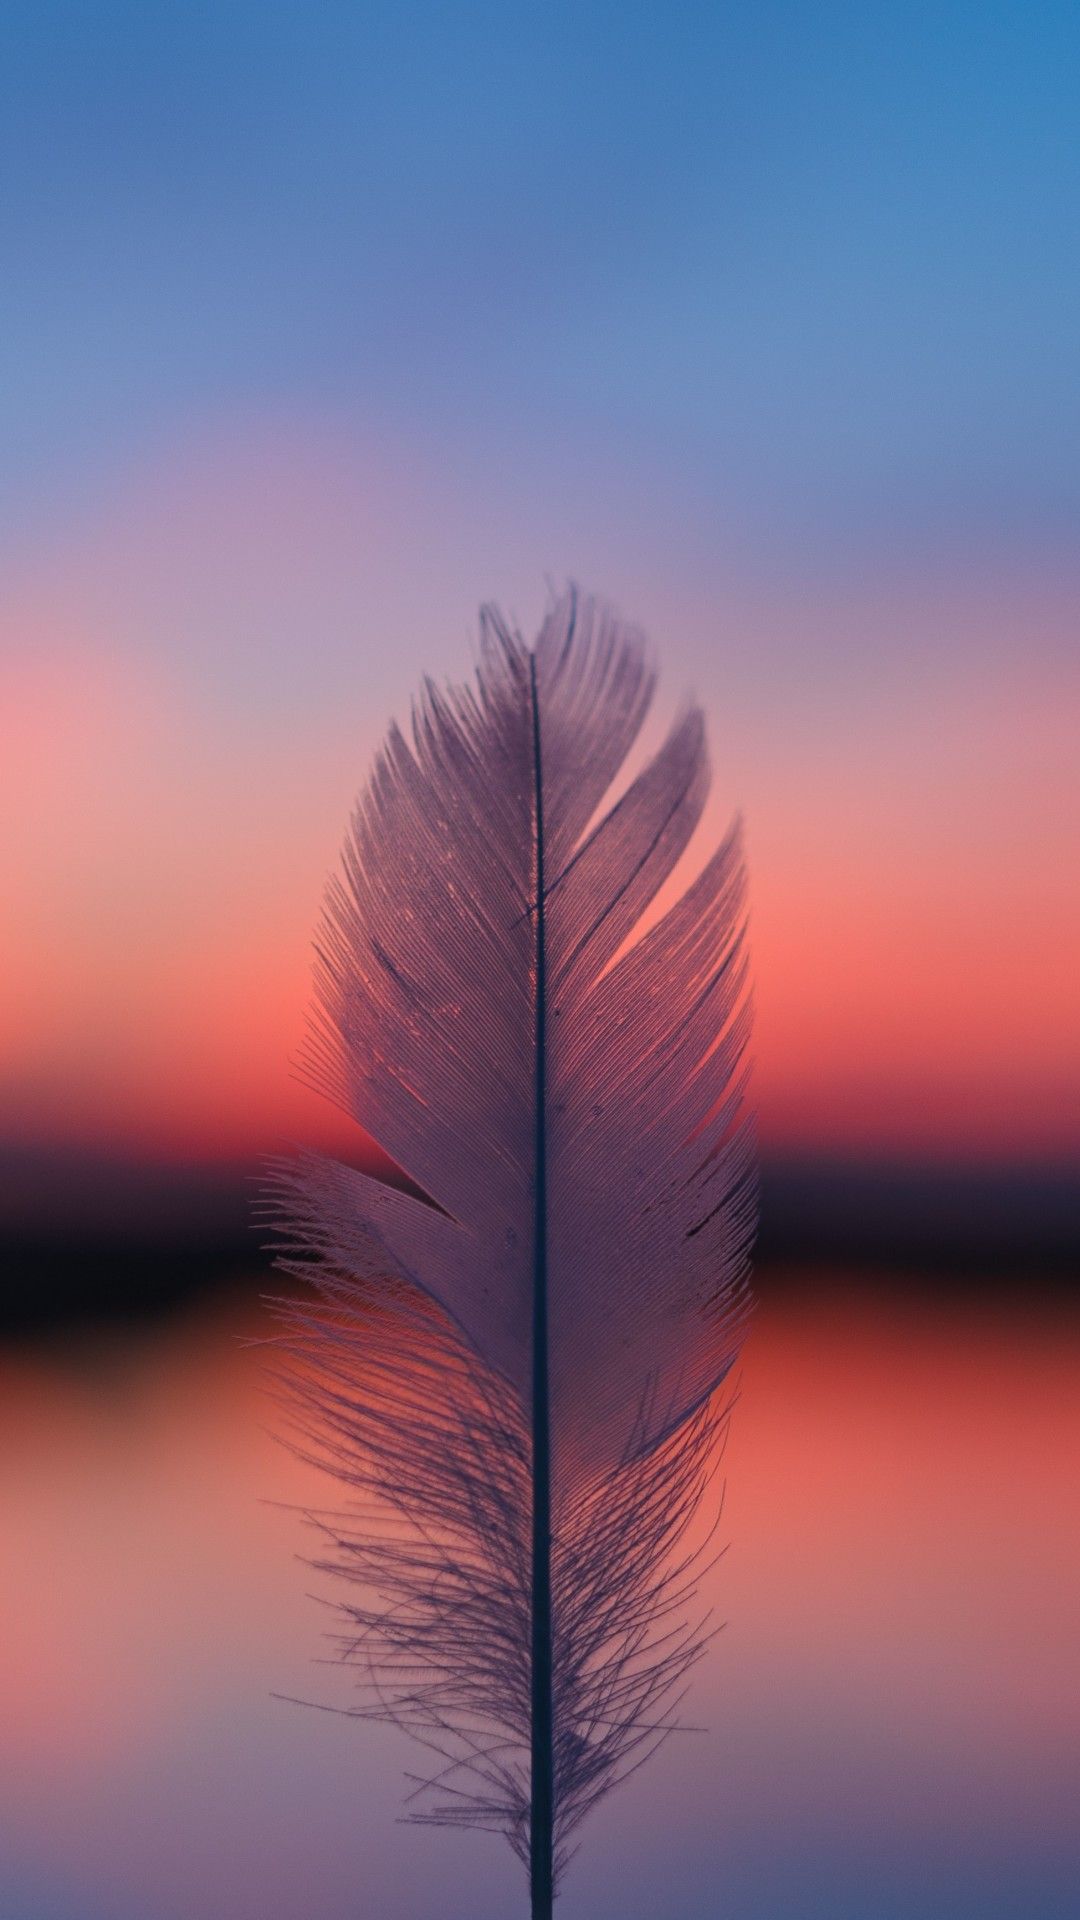 Feather Focus Blur Sunset 5k Mobile Wallpaper (iPhone, Android, Samsung, Pixel, Xiaomi)